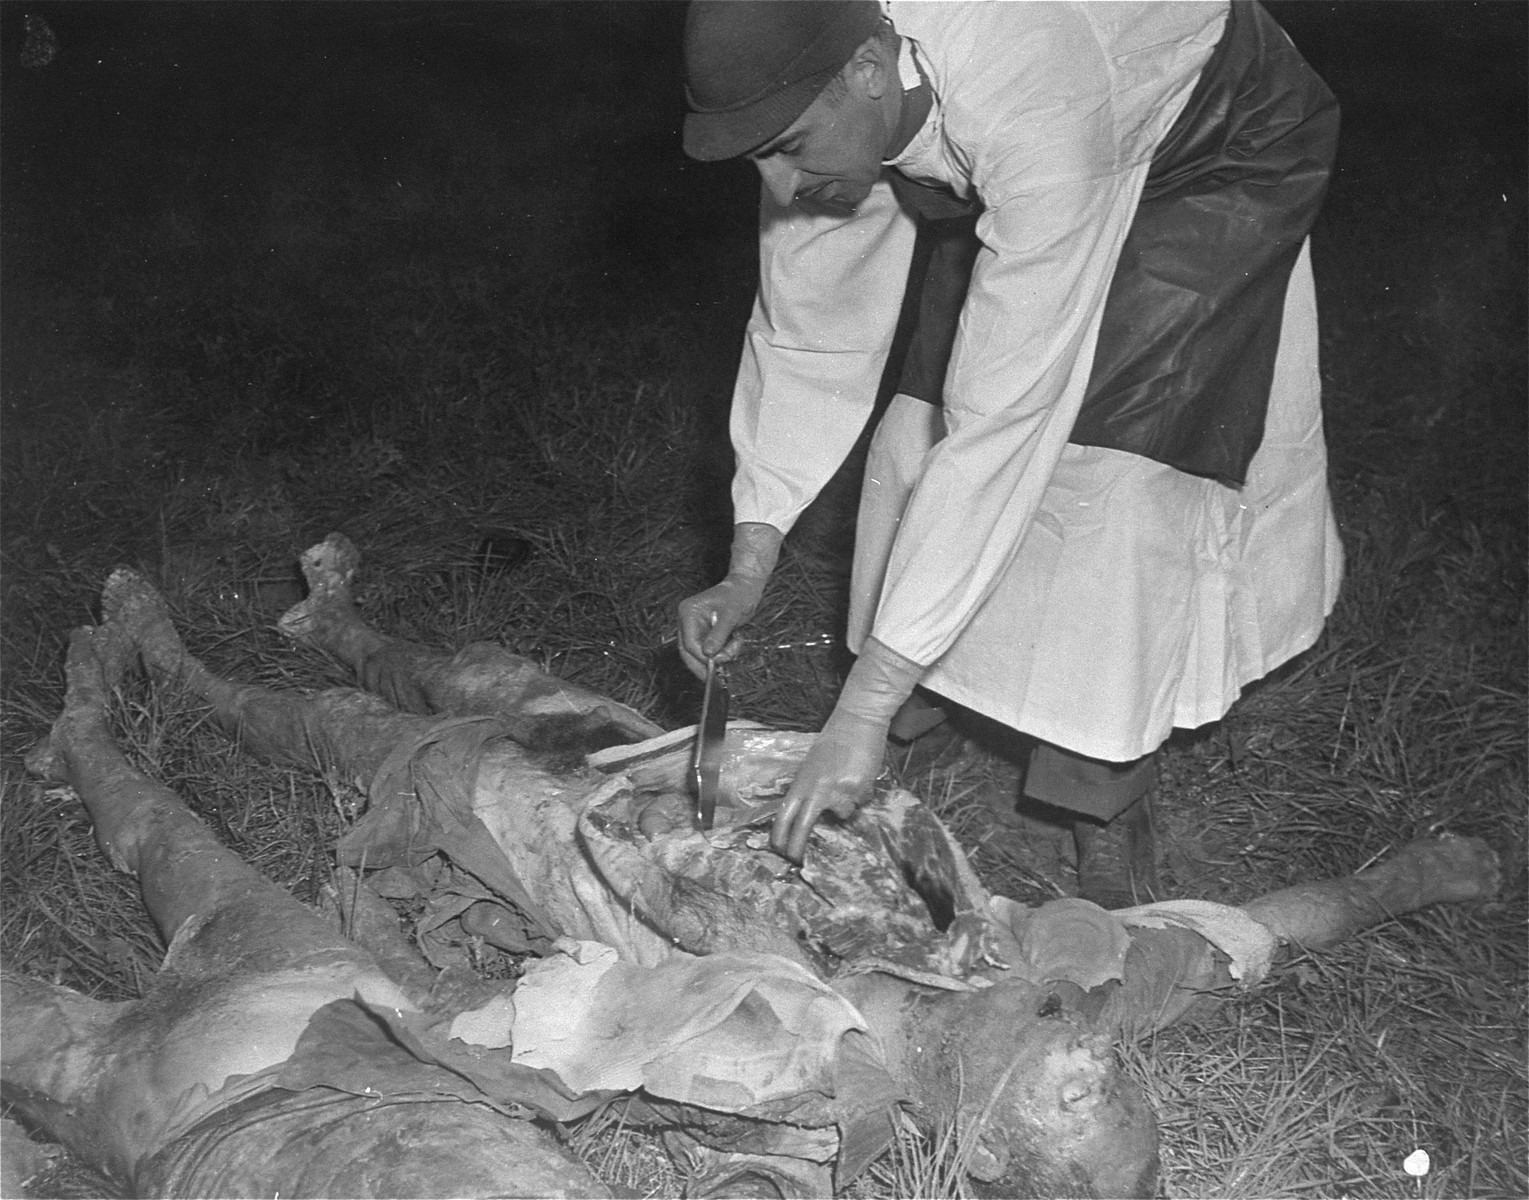 Major Herman Bolker, a member of the war crimes investigation team, performs an autopsy on an exhumed Polish victim who was put to death at the Hadamar Institute.

The photograph was taken by an American military photographer soon after the liberation.